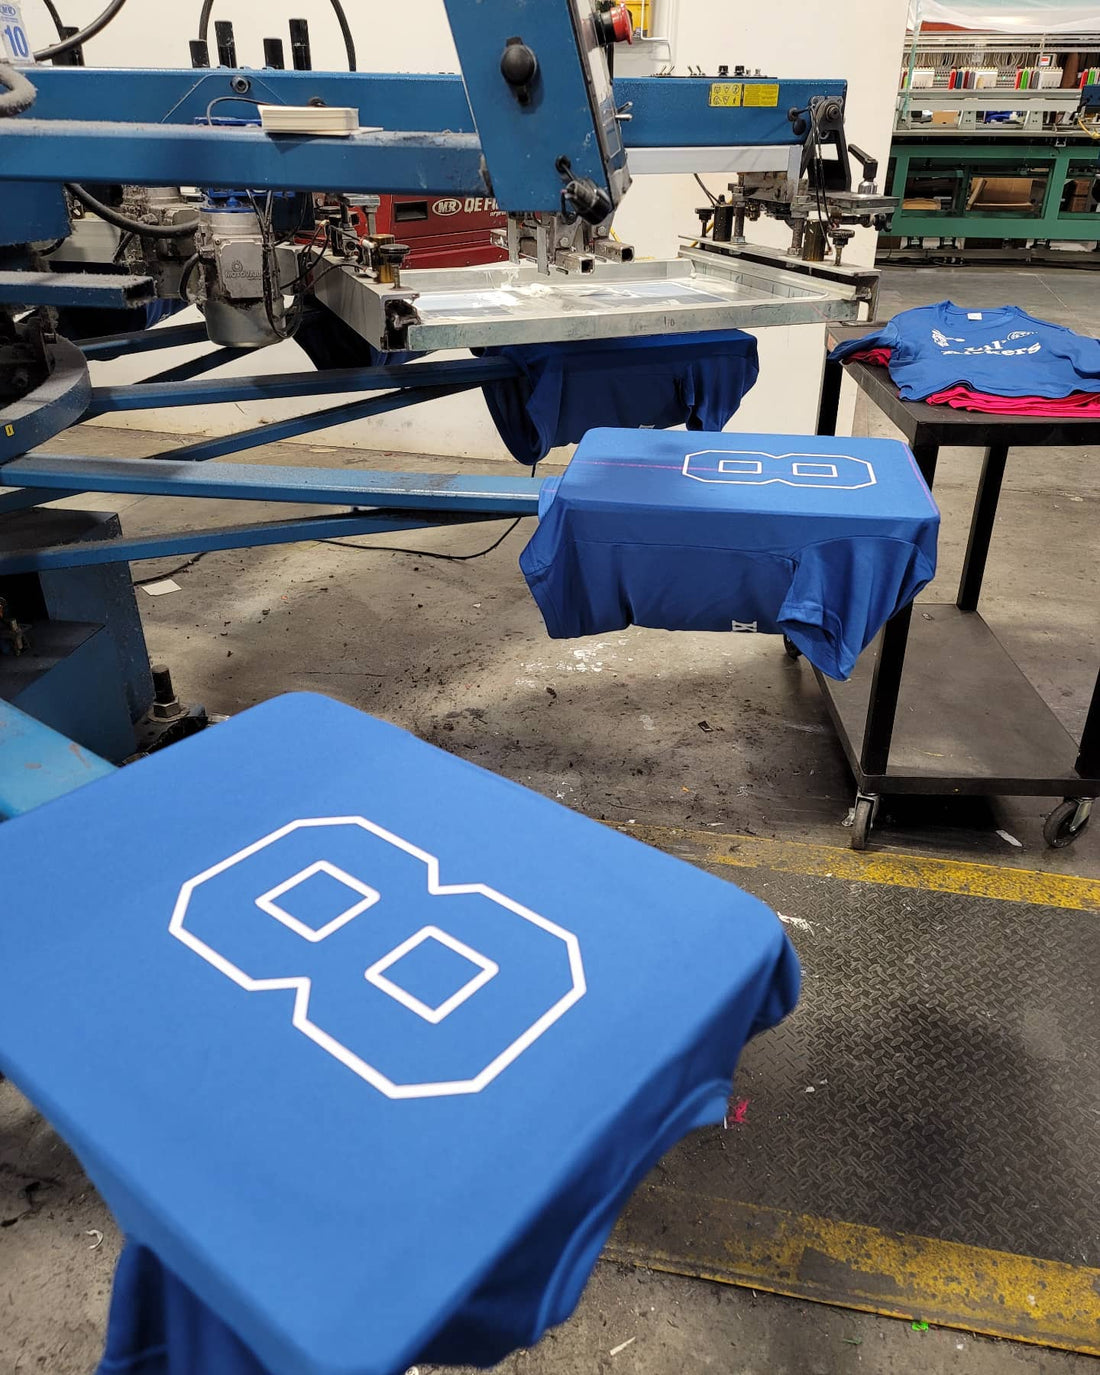 7 Reasons Why 2023 Will Be a Great Year for T-Shirt Printing